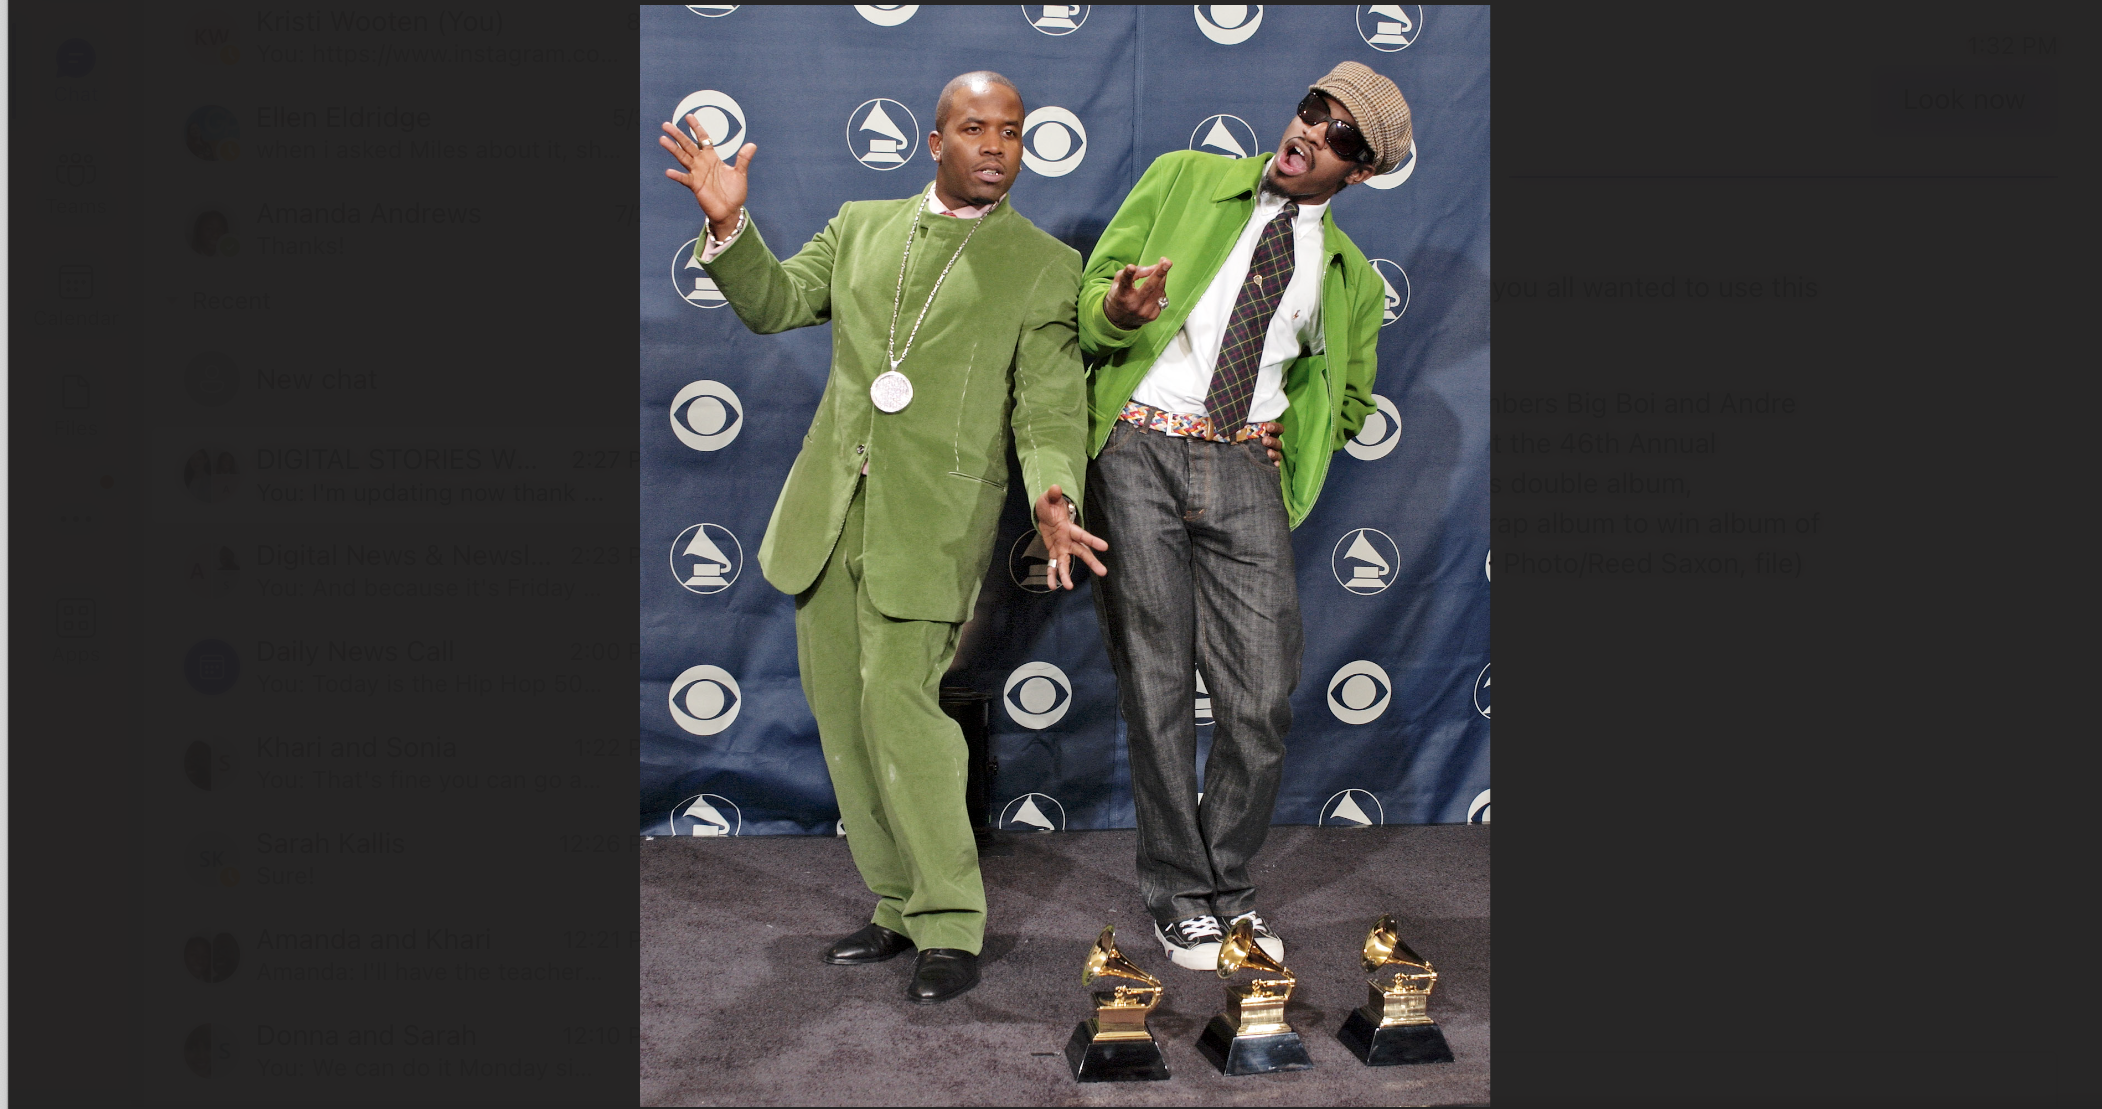 Iconic hip-hop duo OutKast to be honored at Braves game with